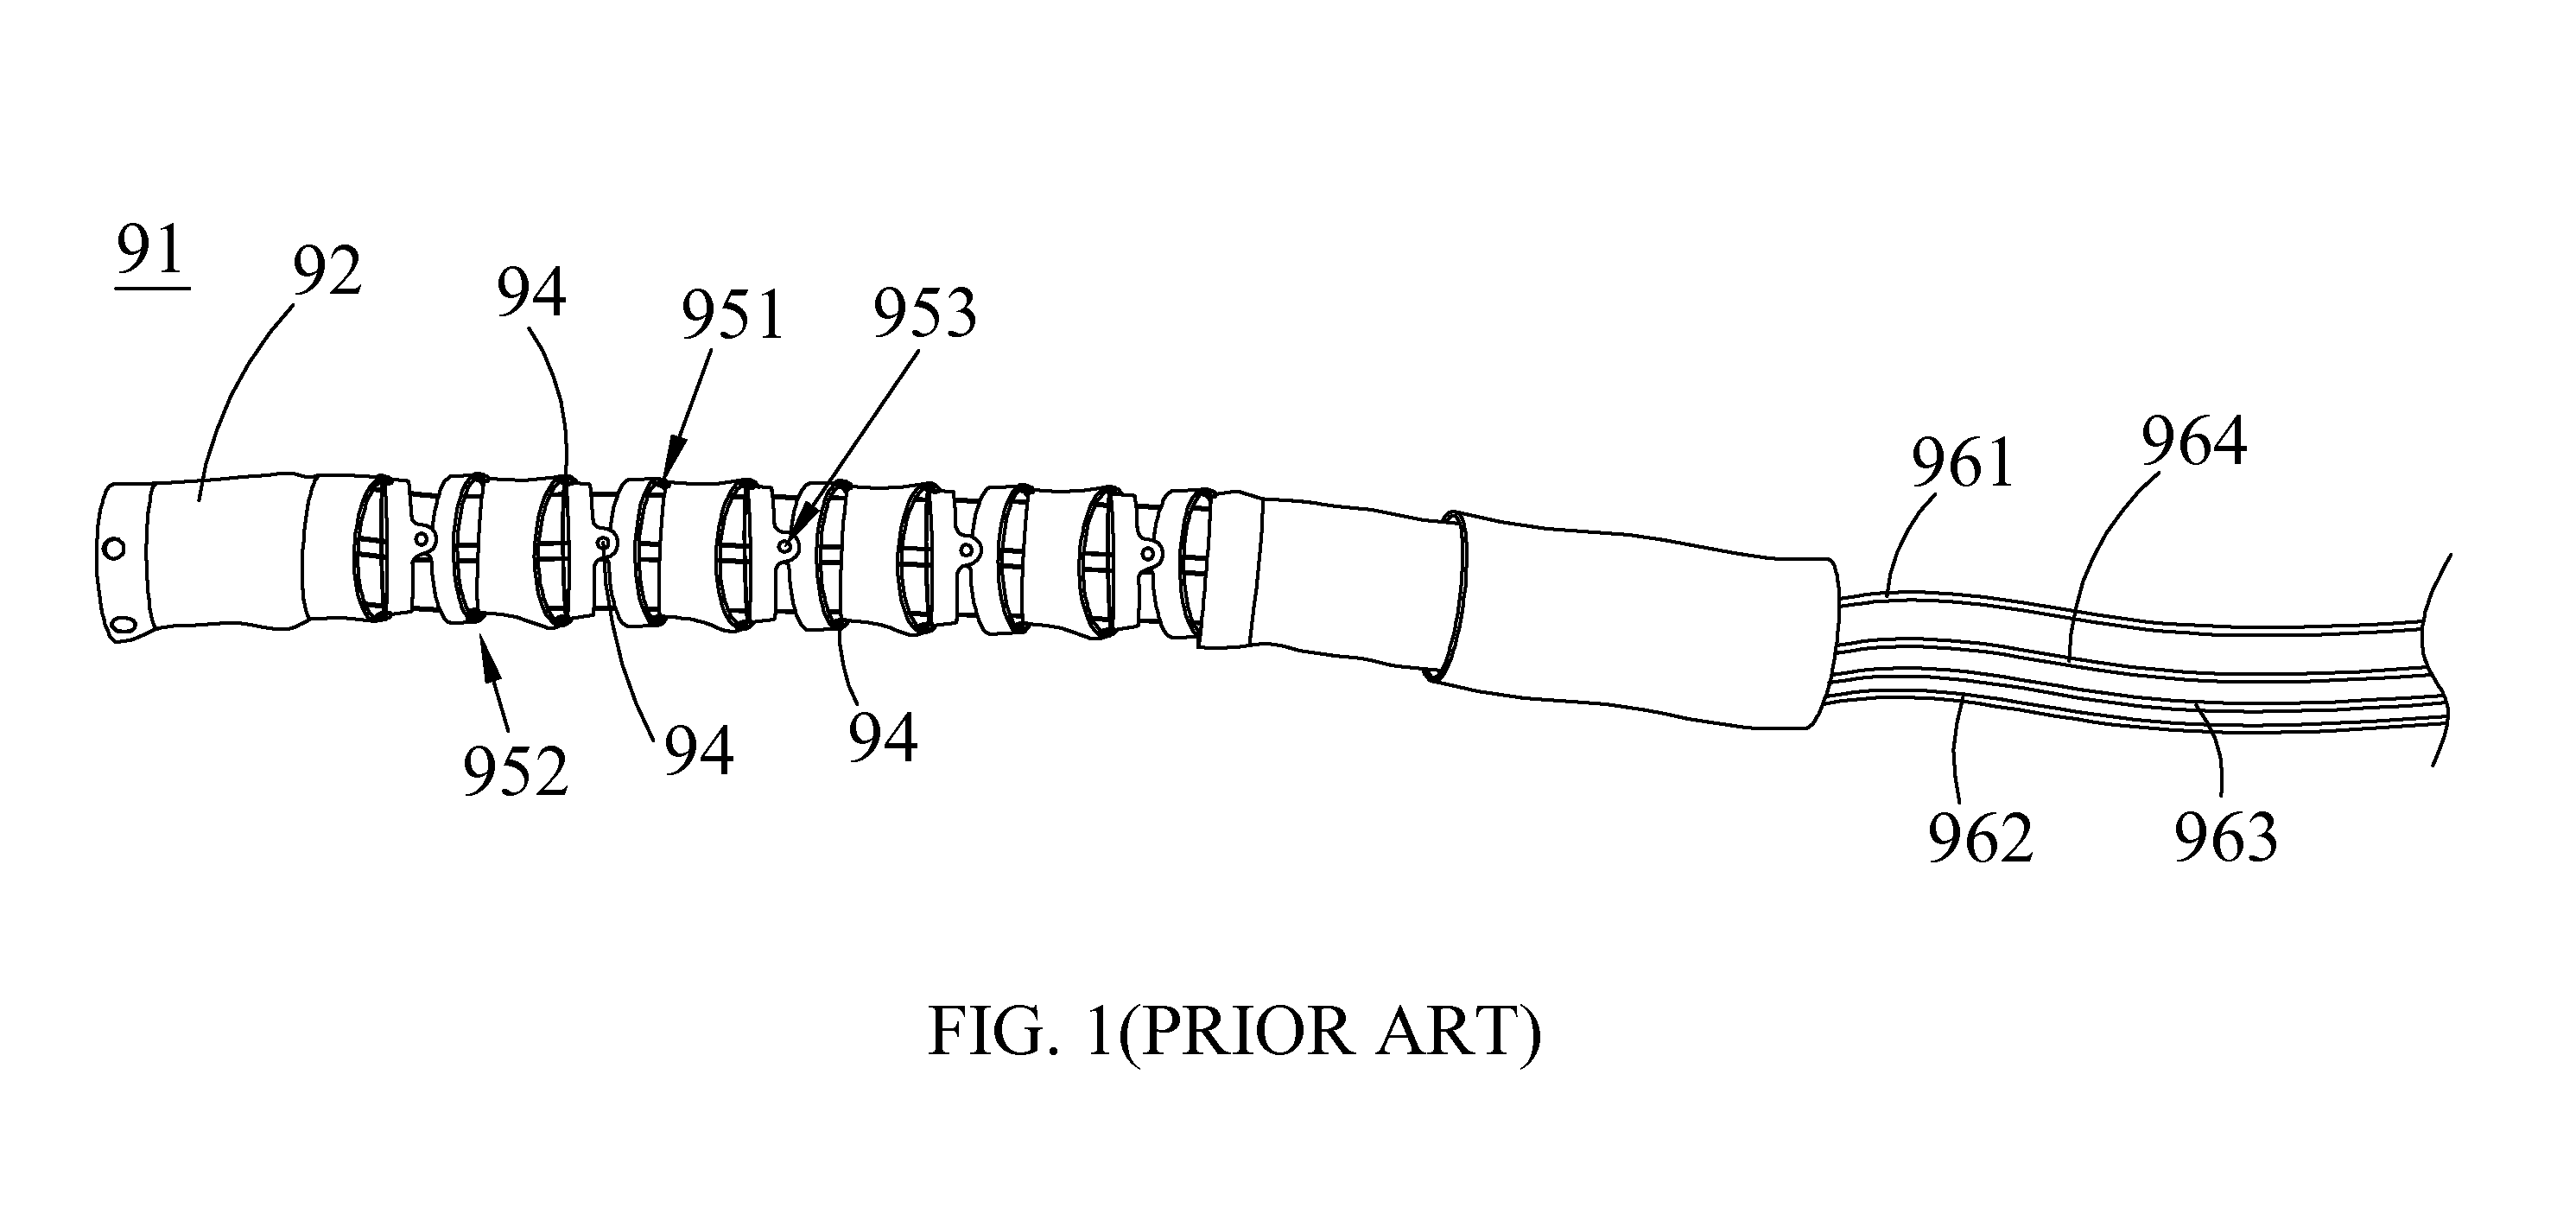 Four-directional tip deflection device for endoscope